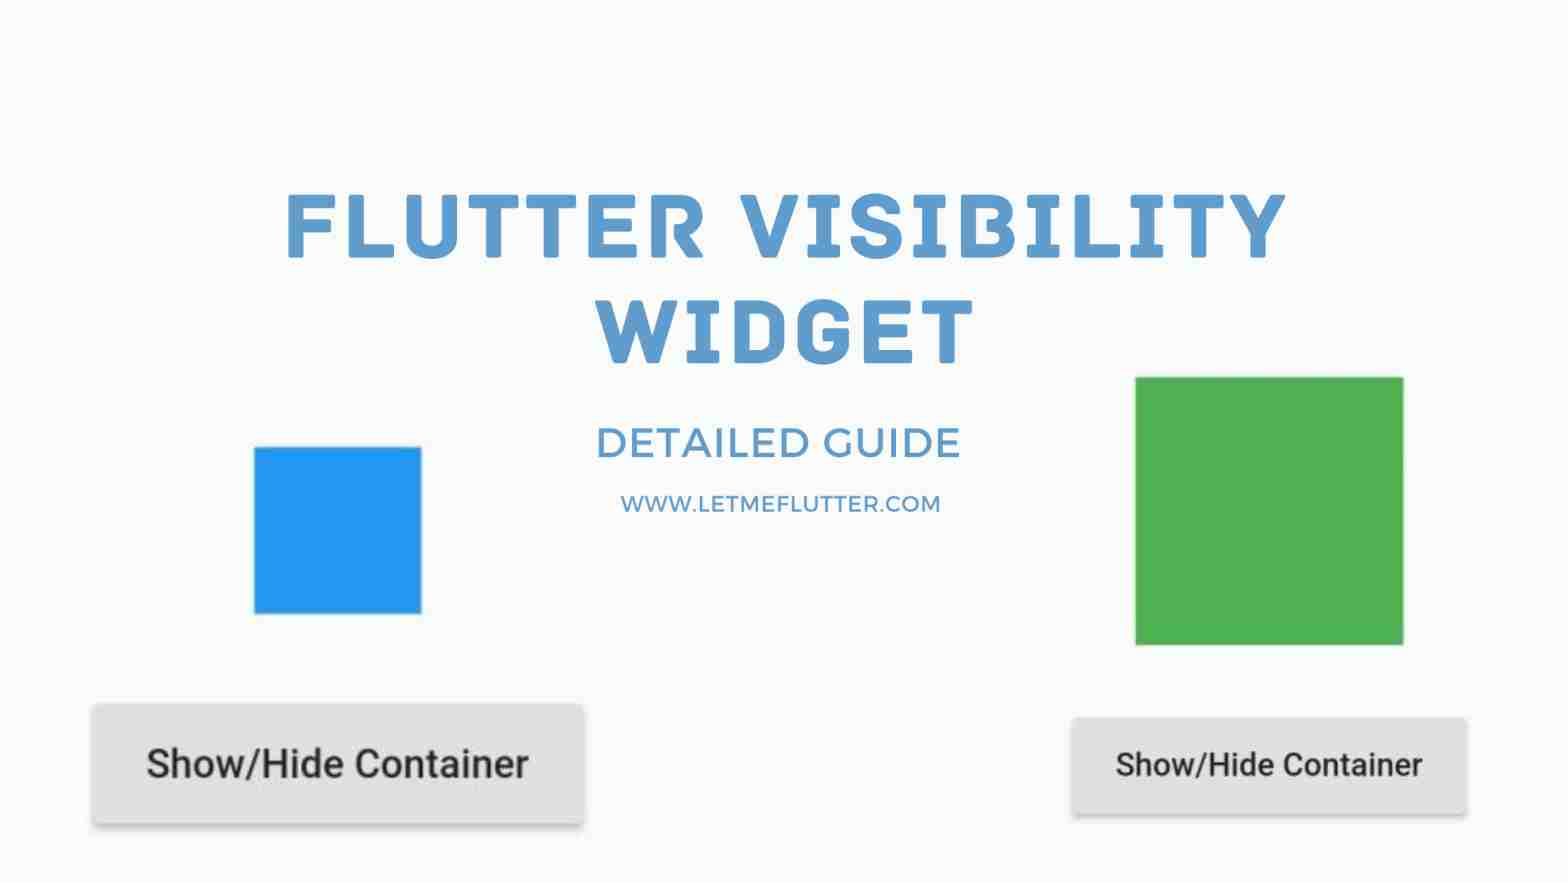 Use Flutter Visibility Widget detailed guide with images